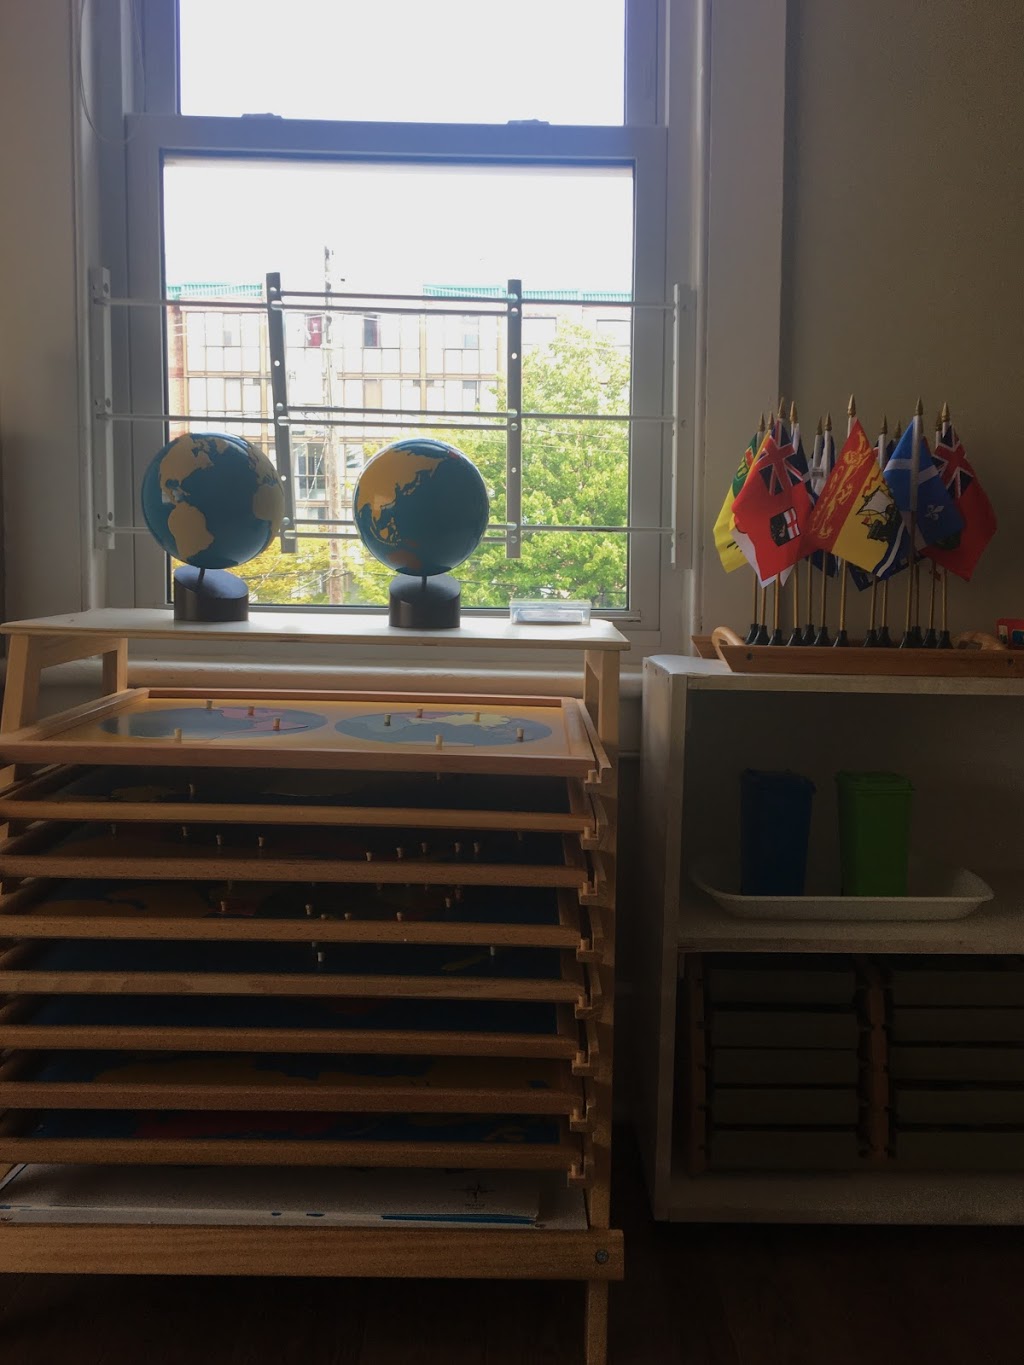 Learning Tree - Montessori Whitby | 126 Ash St, Whitby, ON L1N 4A9, Canada | Phone: (289) 278-2511